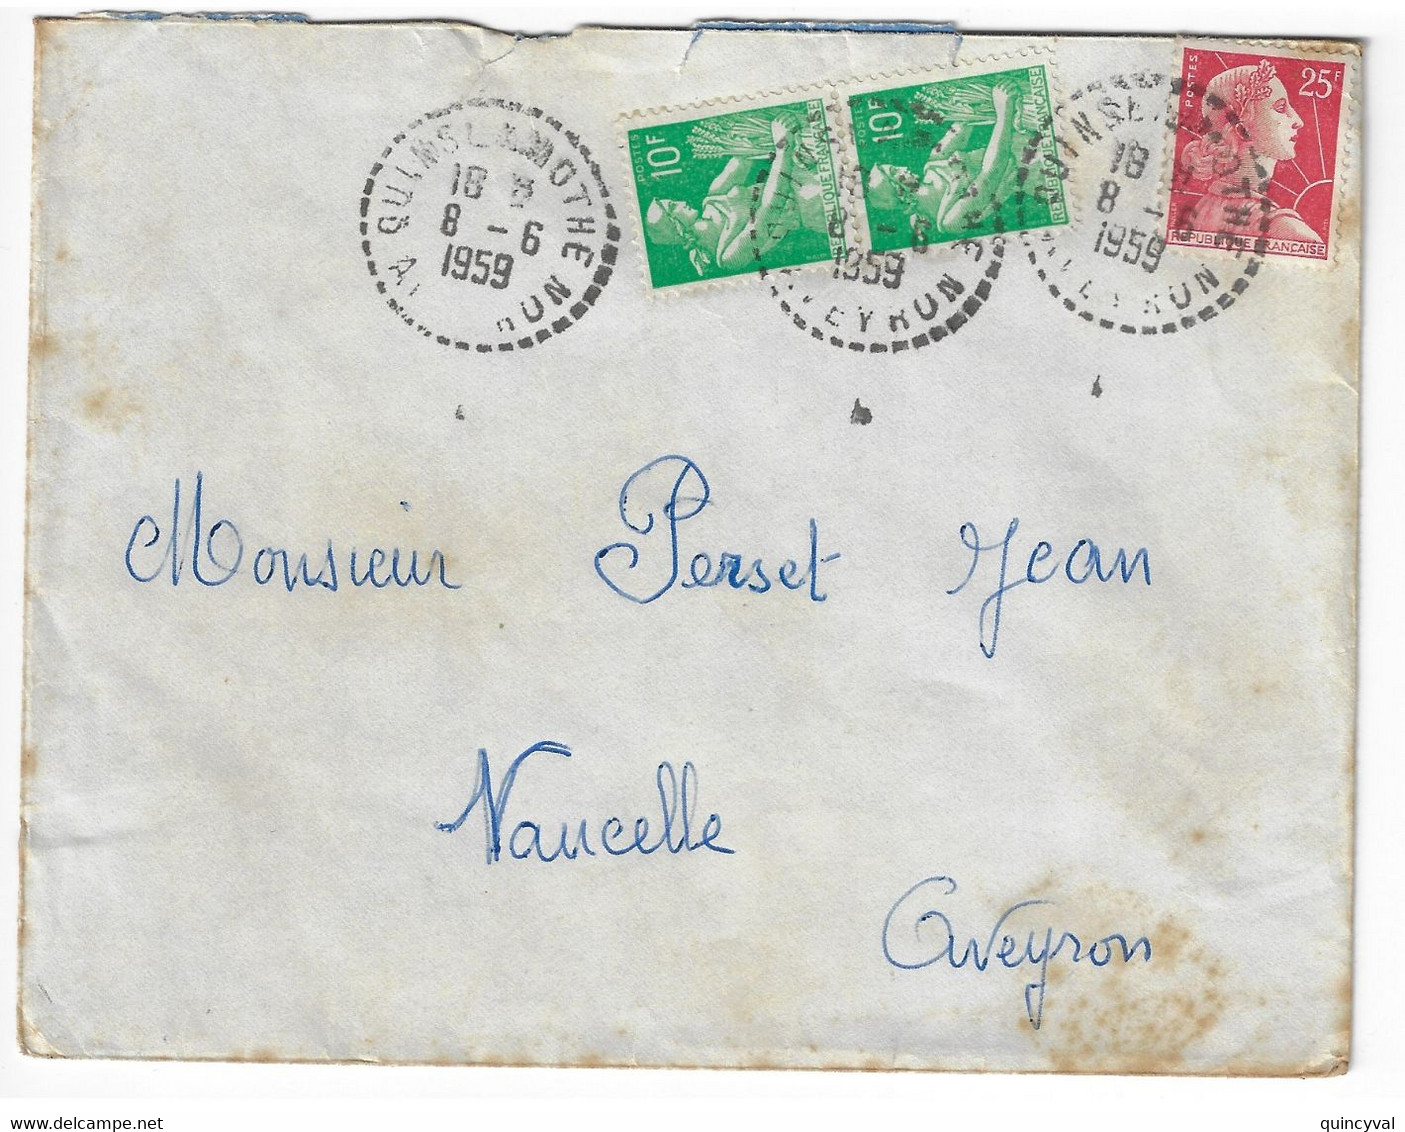 QUINS Aveyron Lettre 2° Ech Tarif 6 1 1959 45 F 25F Muller 10 F Moissonneuse Yv 1011C 1115A Ob Type Cercle Pointillé - Covers & Documents